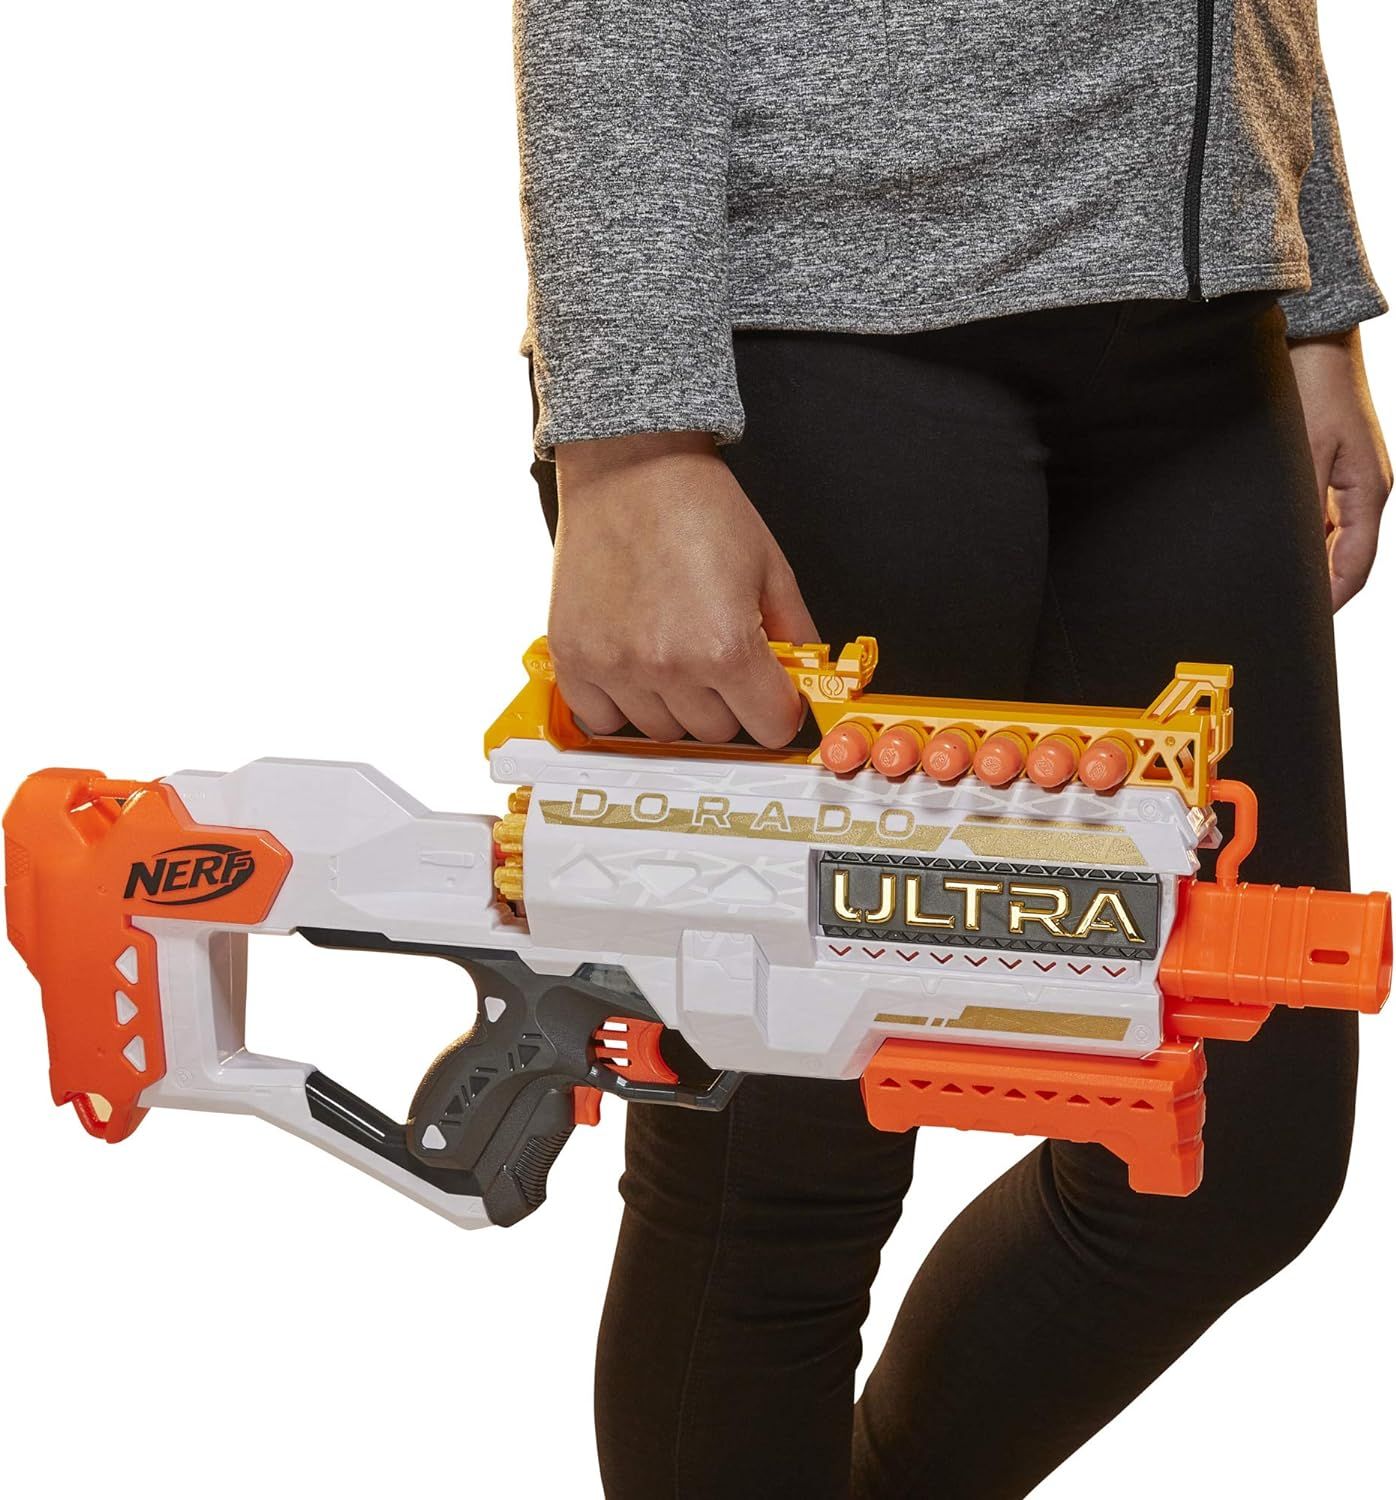 NERF Ultra Dorado Motorised Blaster, Premium Gold Accents, Fast-Back  Loading, 12 NERF Ultra Darts, Compatible Only with NERF Ultra Darts,Multicolor,F2017,  Hobbies & Toys, Toys & Games on Carousell